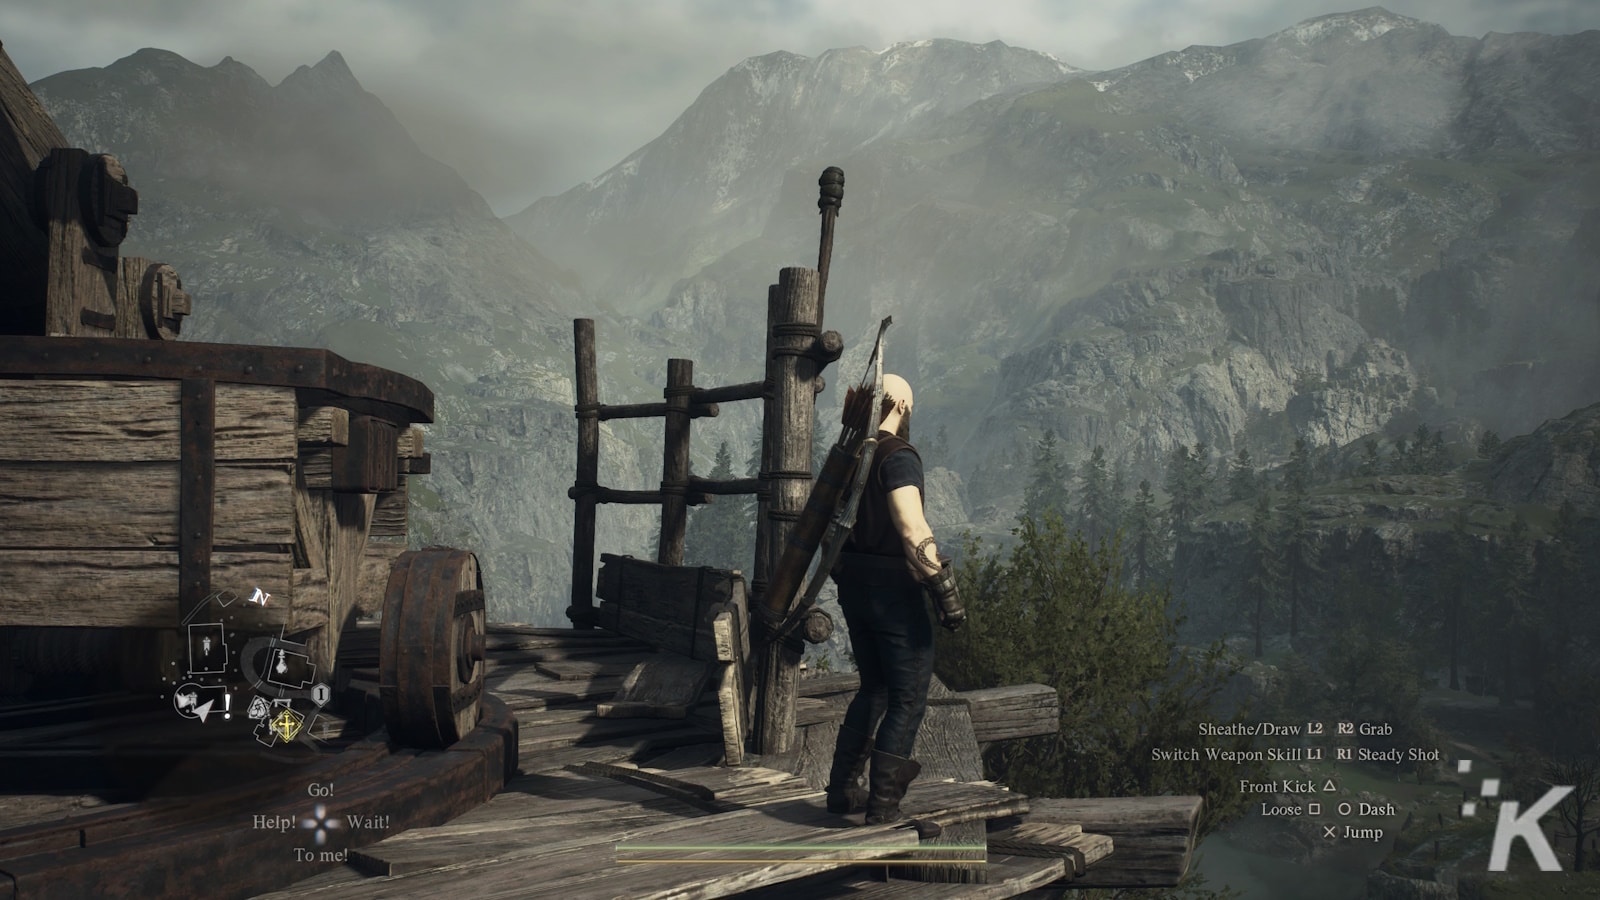 A character with white hair and a leather outfit stands on a wooden platform overlooking a mountainous landscape in a video game, with control prompts visible on the screen.